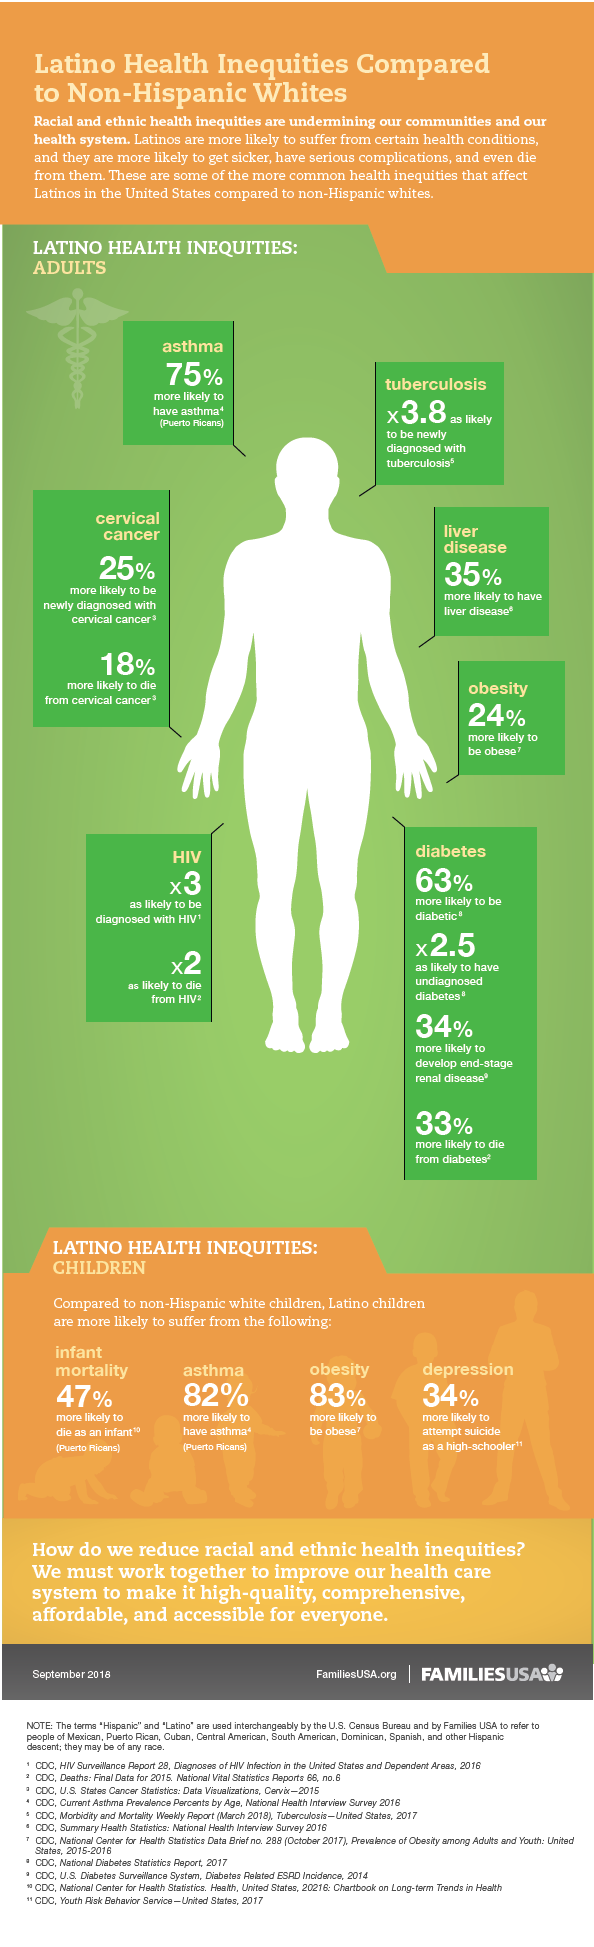 https://www.familiesusa.org/wp-content/uploads/2019/09/HSI-Health-inequities_latinos-infographic_final_092518-01.png